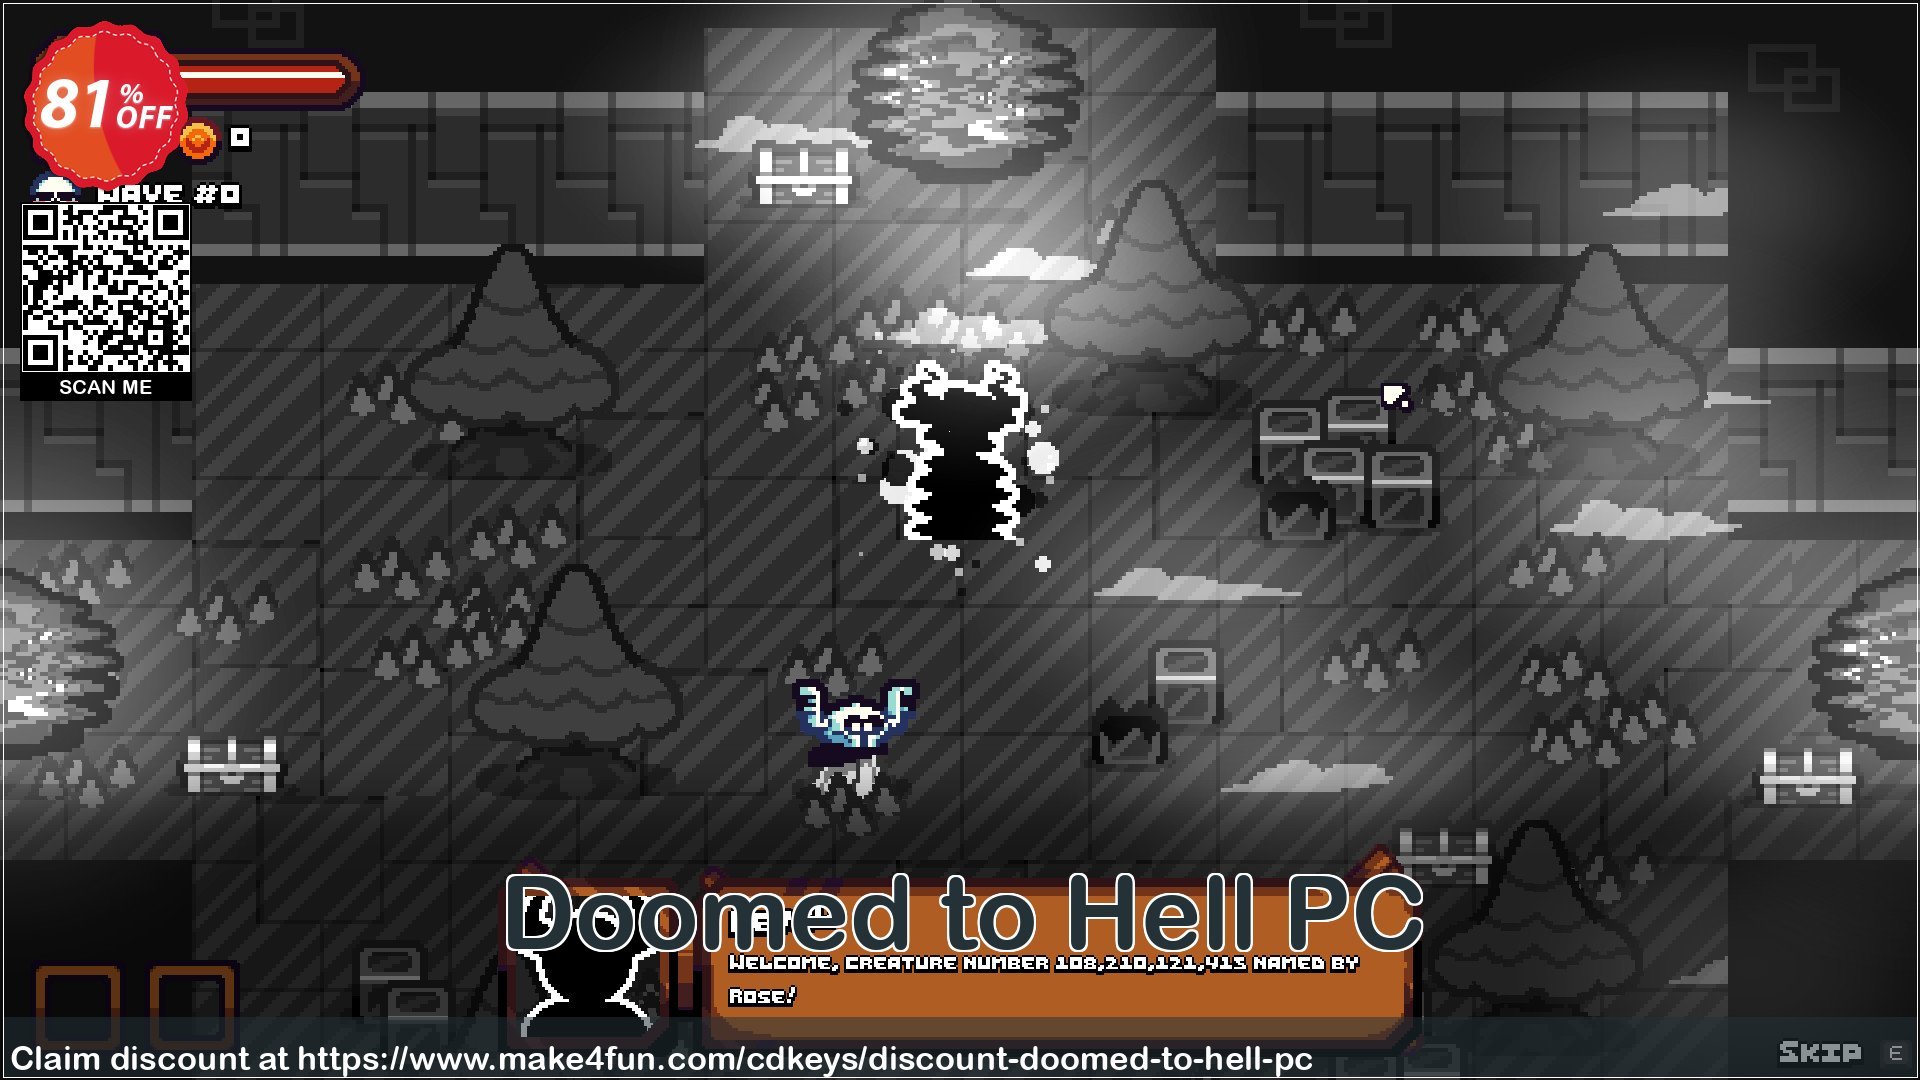 Doomed to hell pc coupon codes for #mothersday with 80% OFF, May 2024 - Make4fun